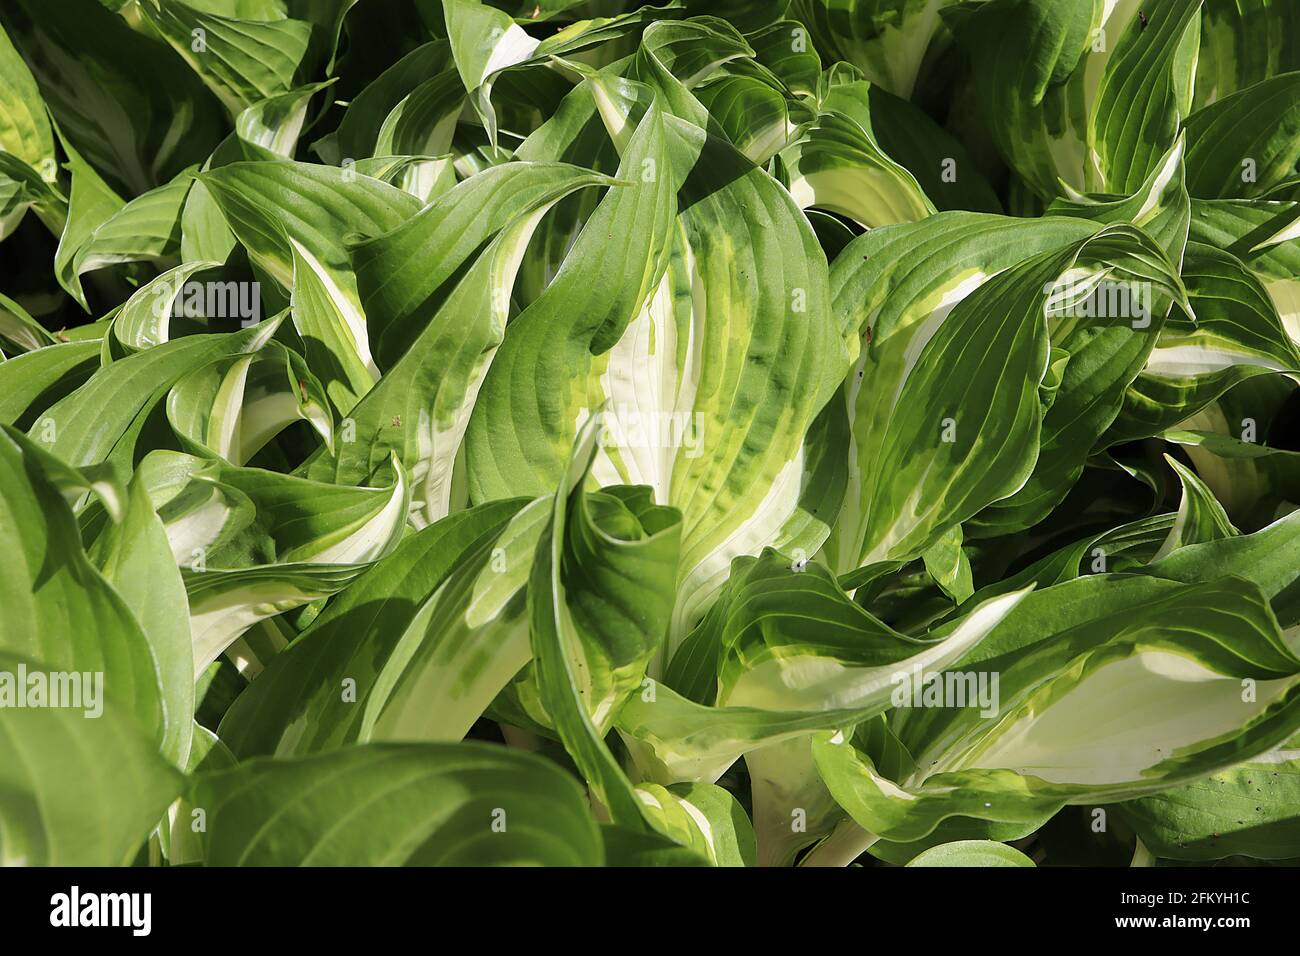 Hosta undulata var univittata one-striped wavy plantain lily – fresh green leaves with light green markings and wide central cream splash, May,England Stock Photo